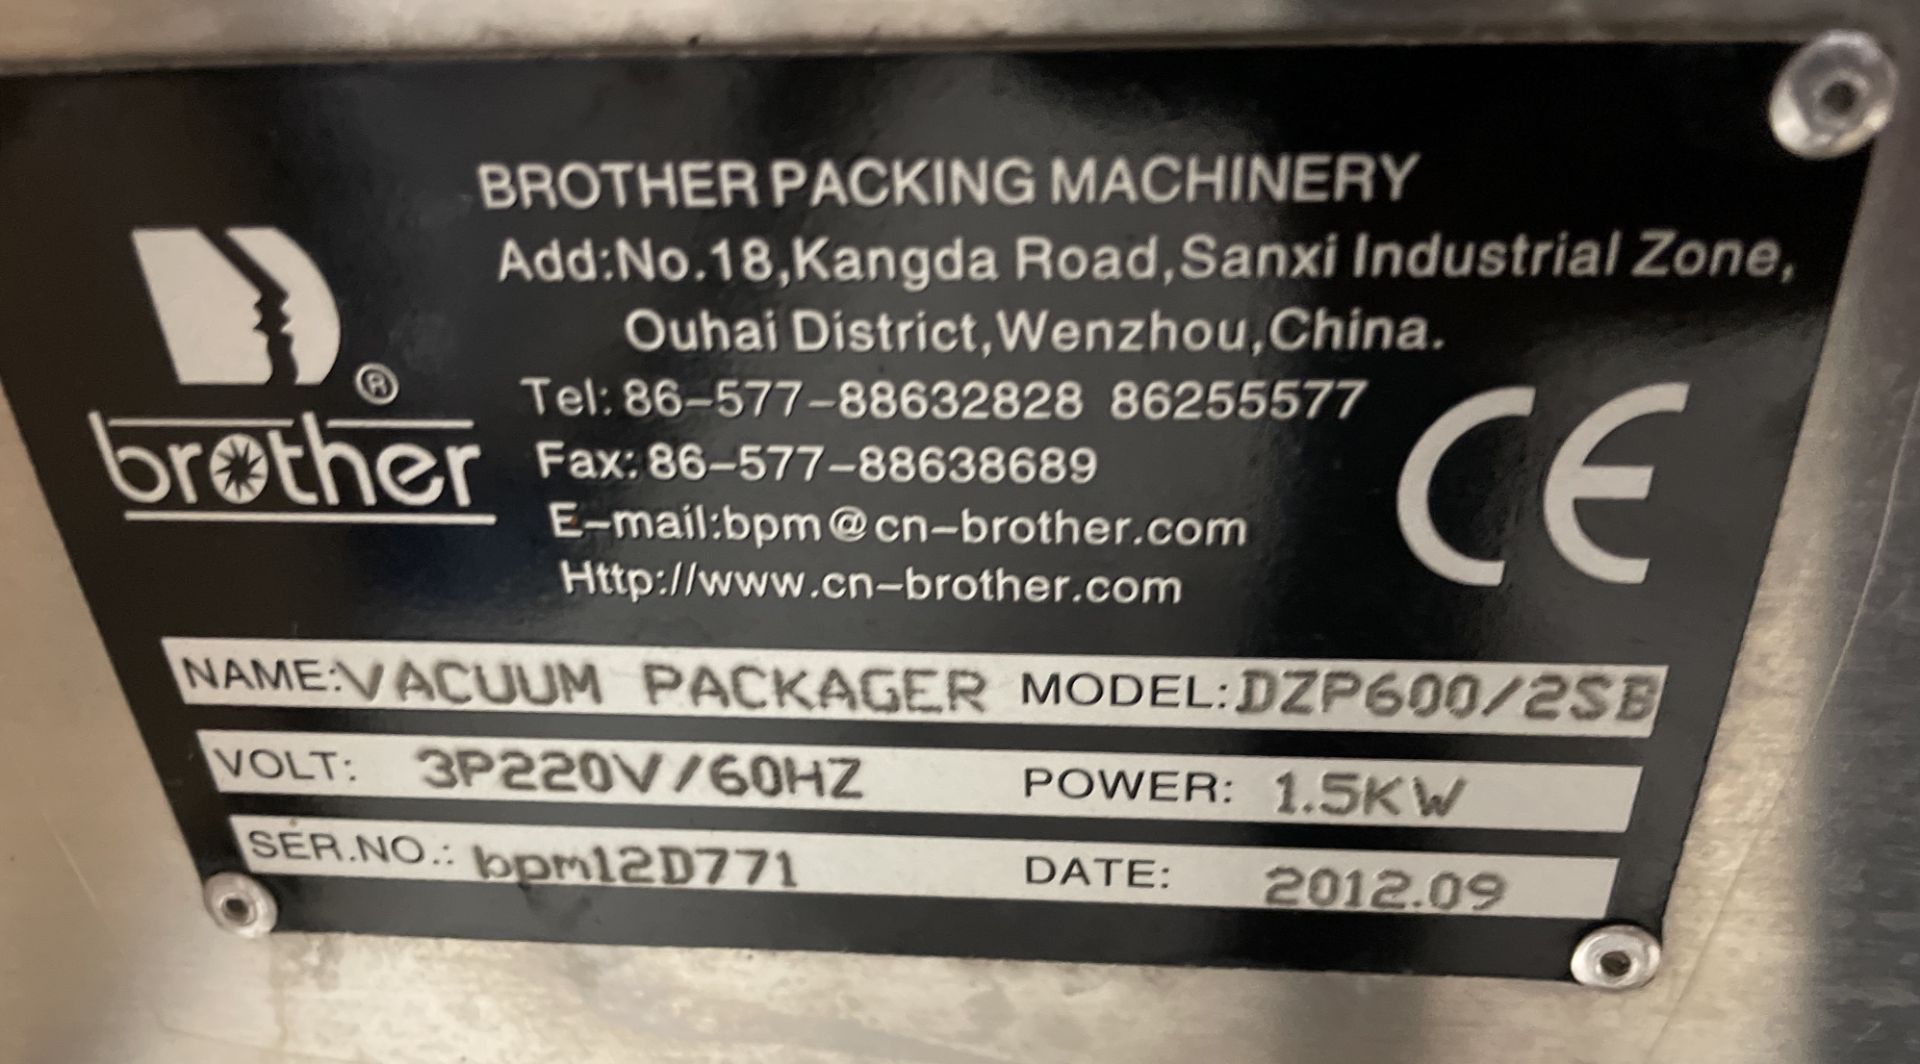 Brother Mdl. CZP600/2SB Vacuum Packaging Machine - Image 3 of 5